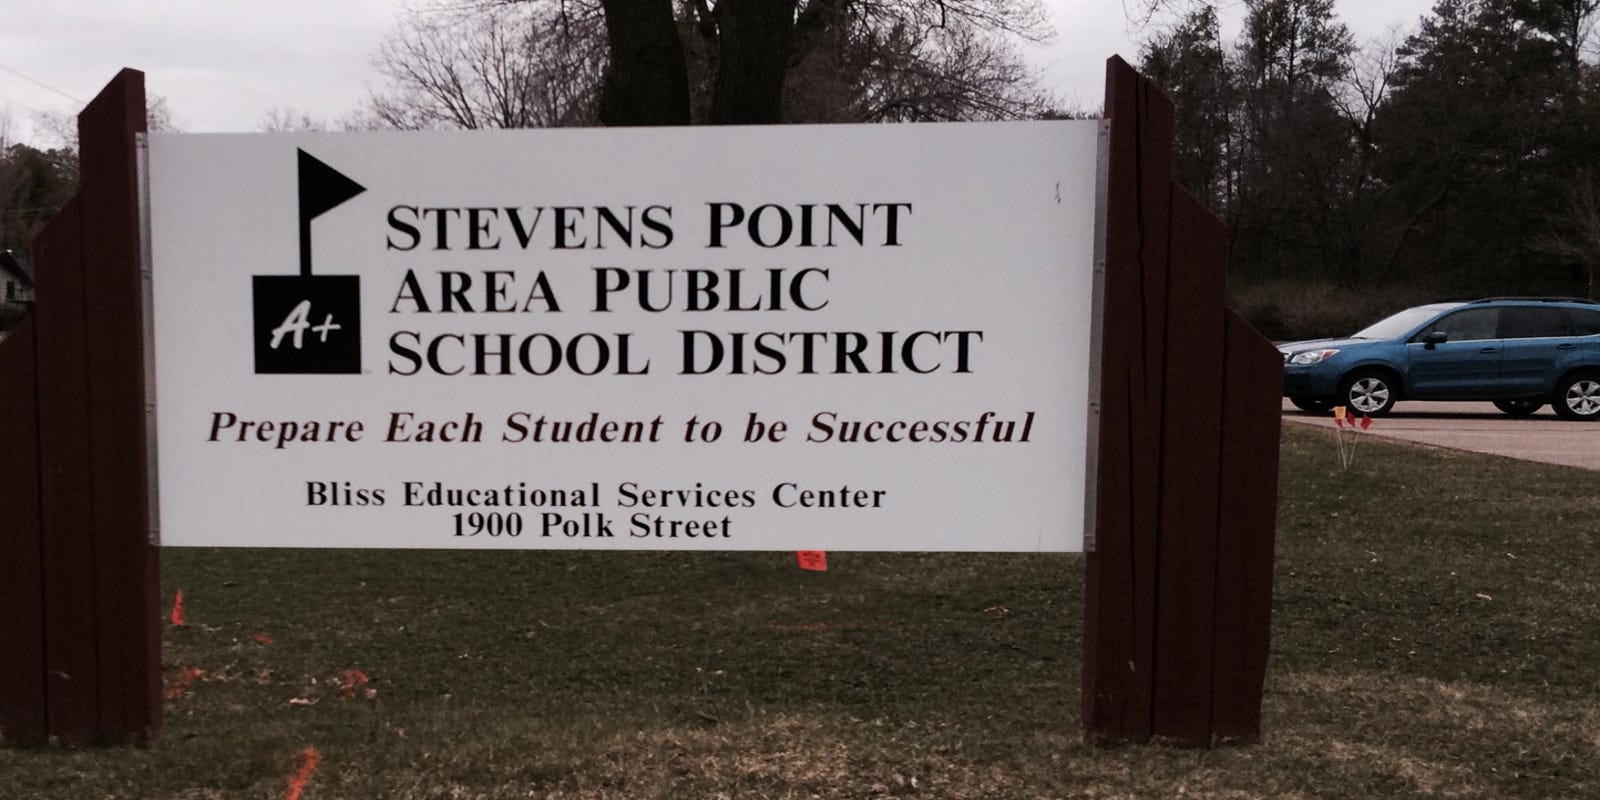 Stevens Point Area School District taxpayers can expect higher taxes with referendums in effect